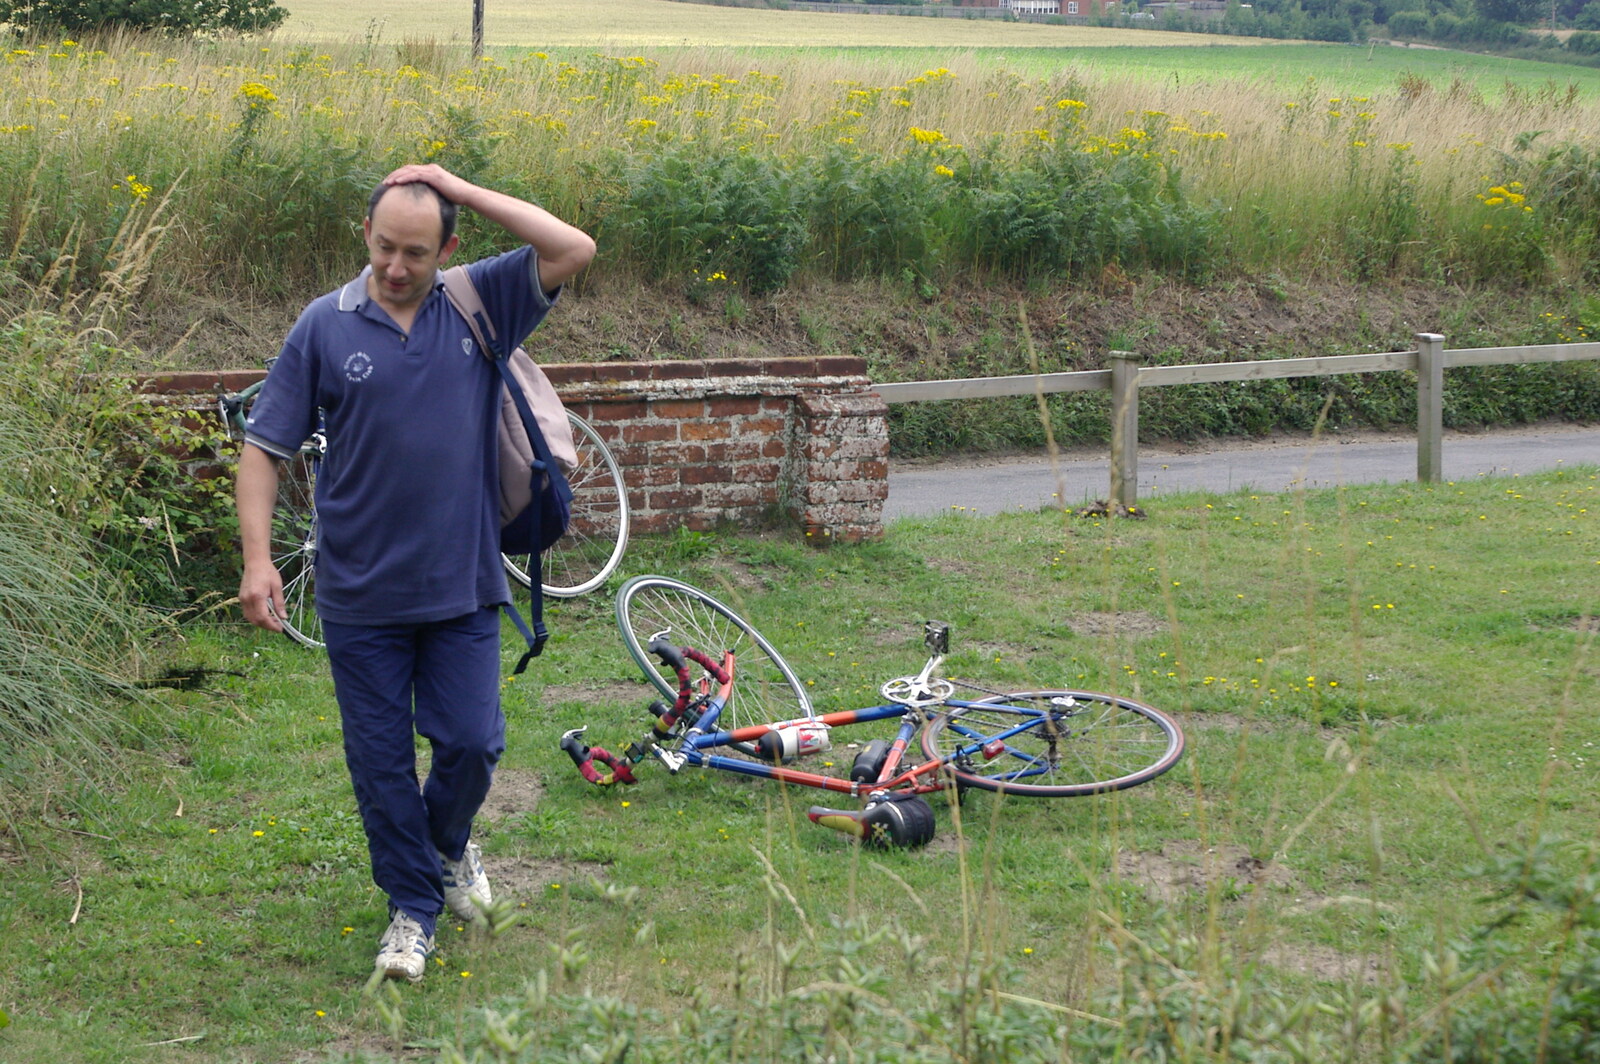 DH walks past Marc's abandoned bicycle from The BSCC Charity Bike Ride, Walberswick, Suffolk - 9th July 2005